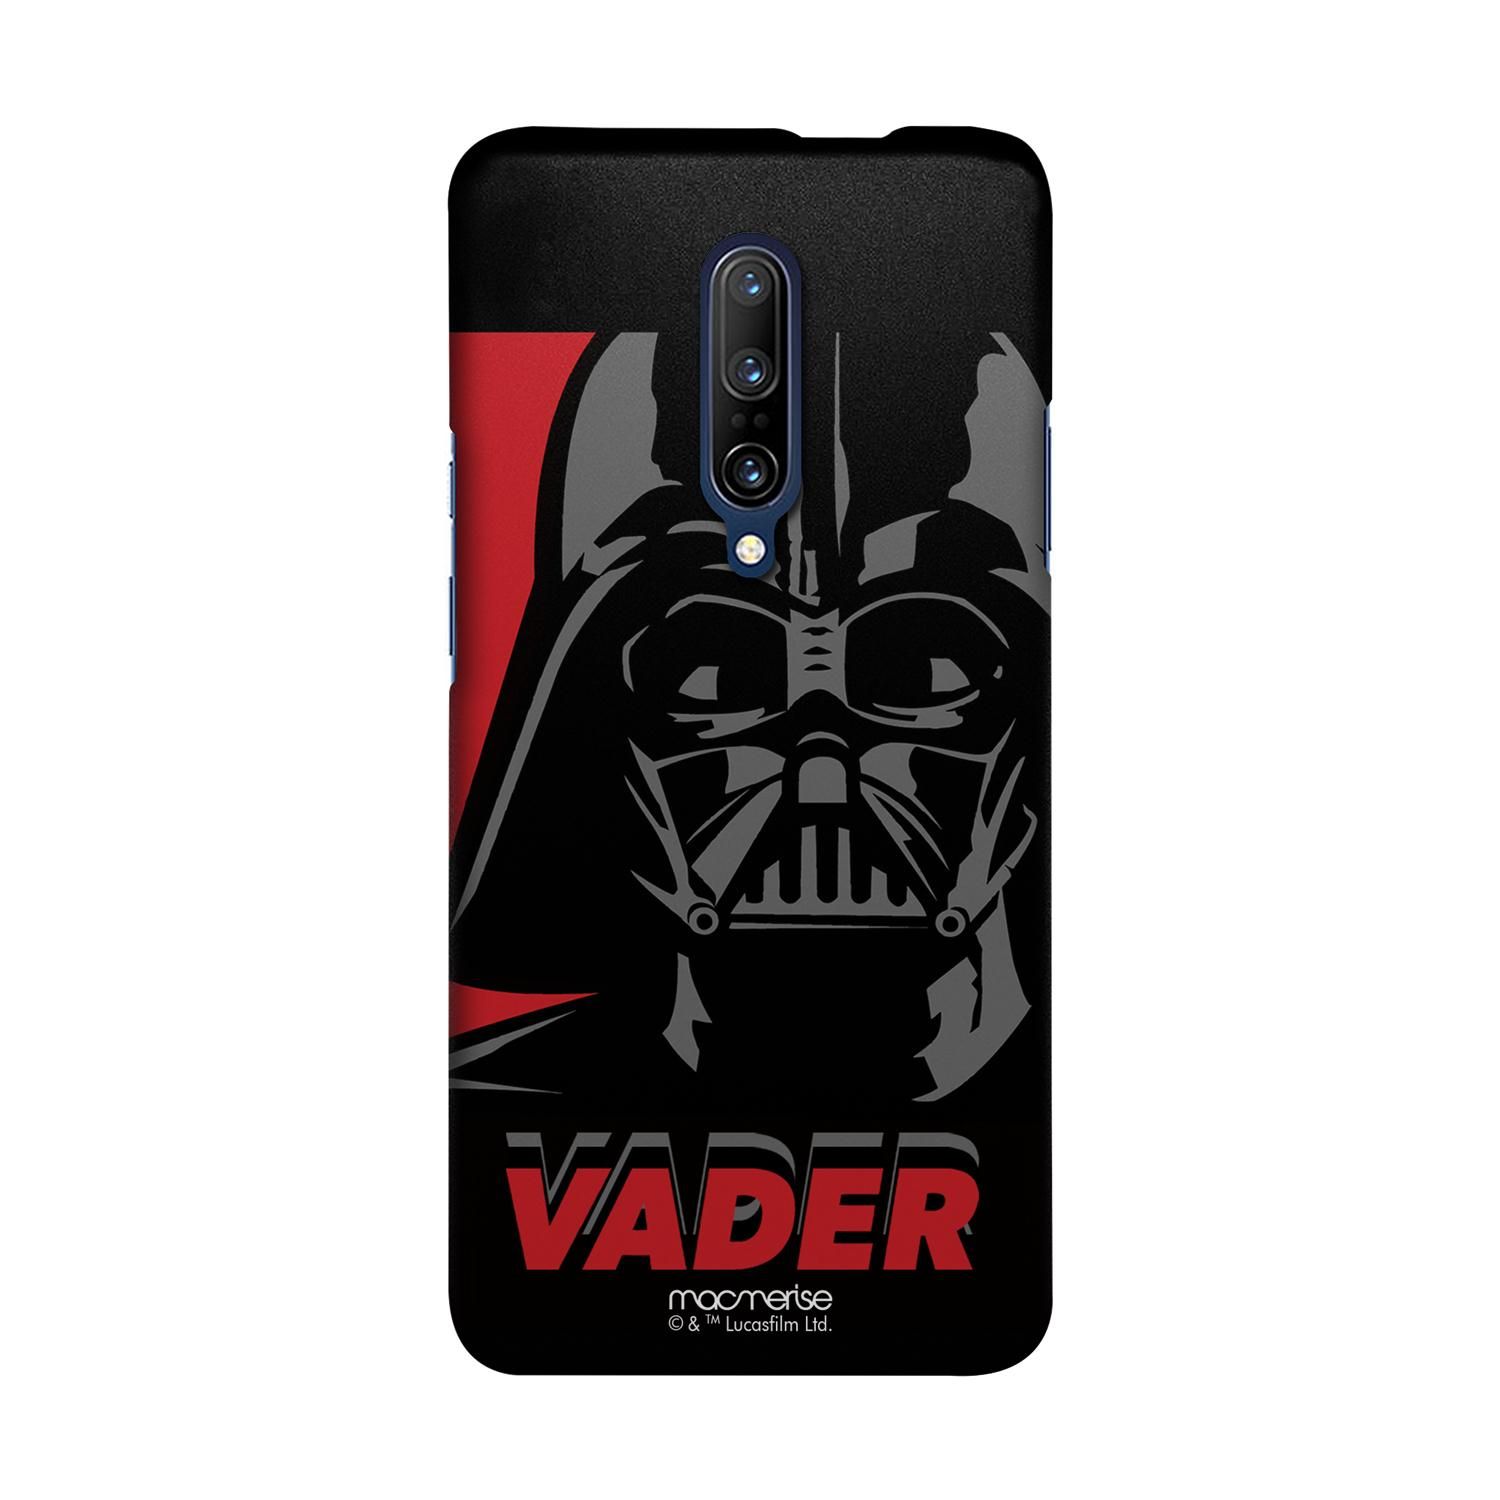 Vader - Sleek Phone Case for OnePlus 7 Pro